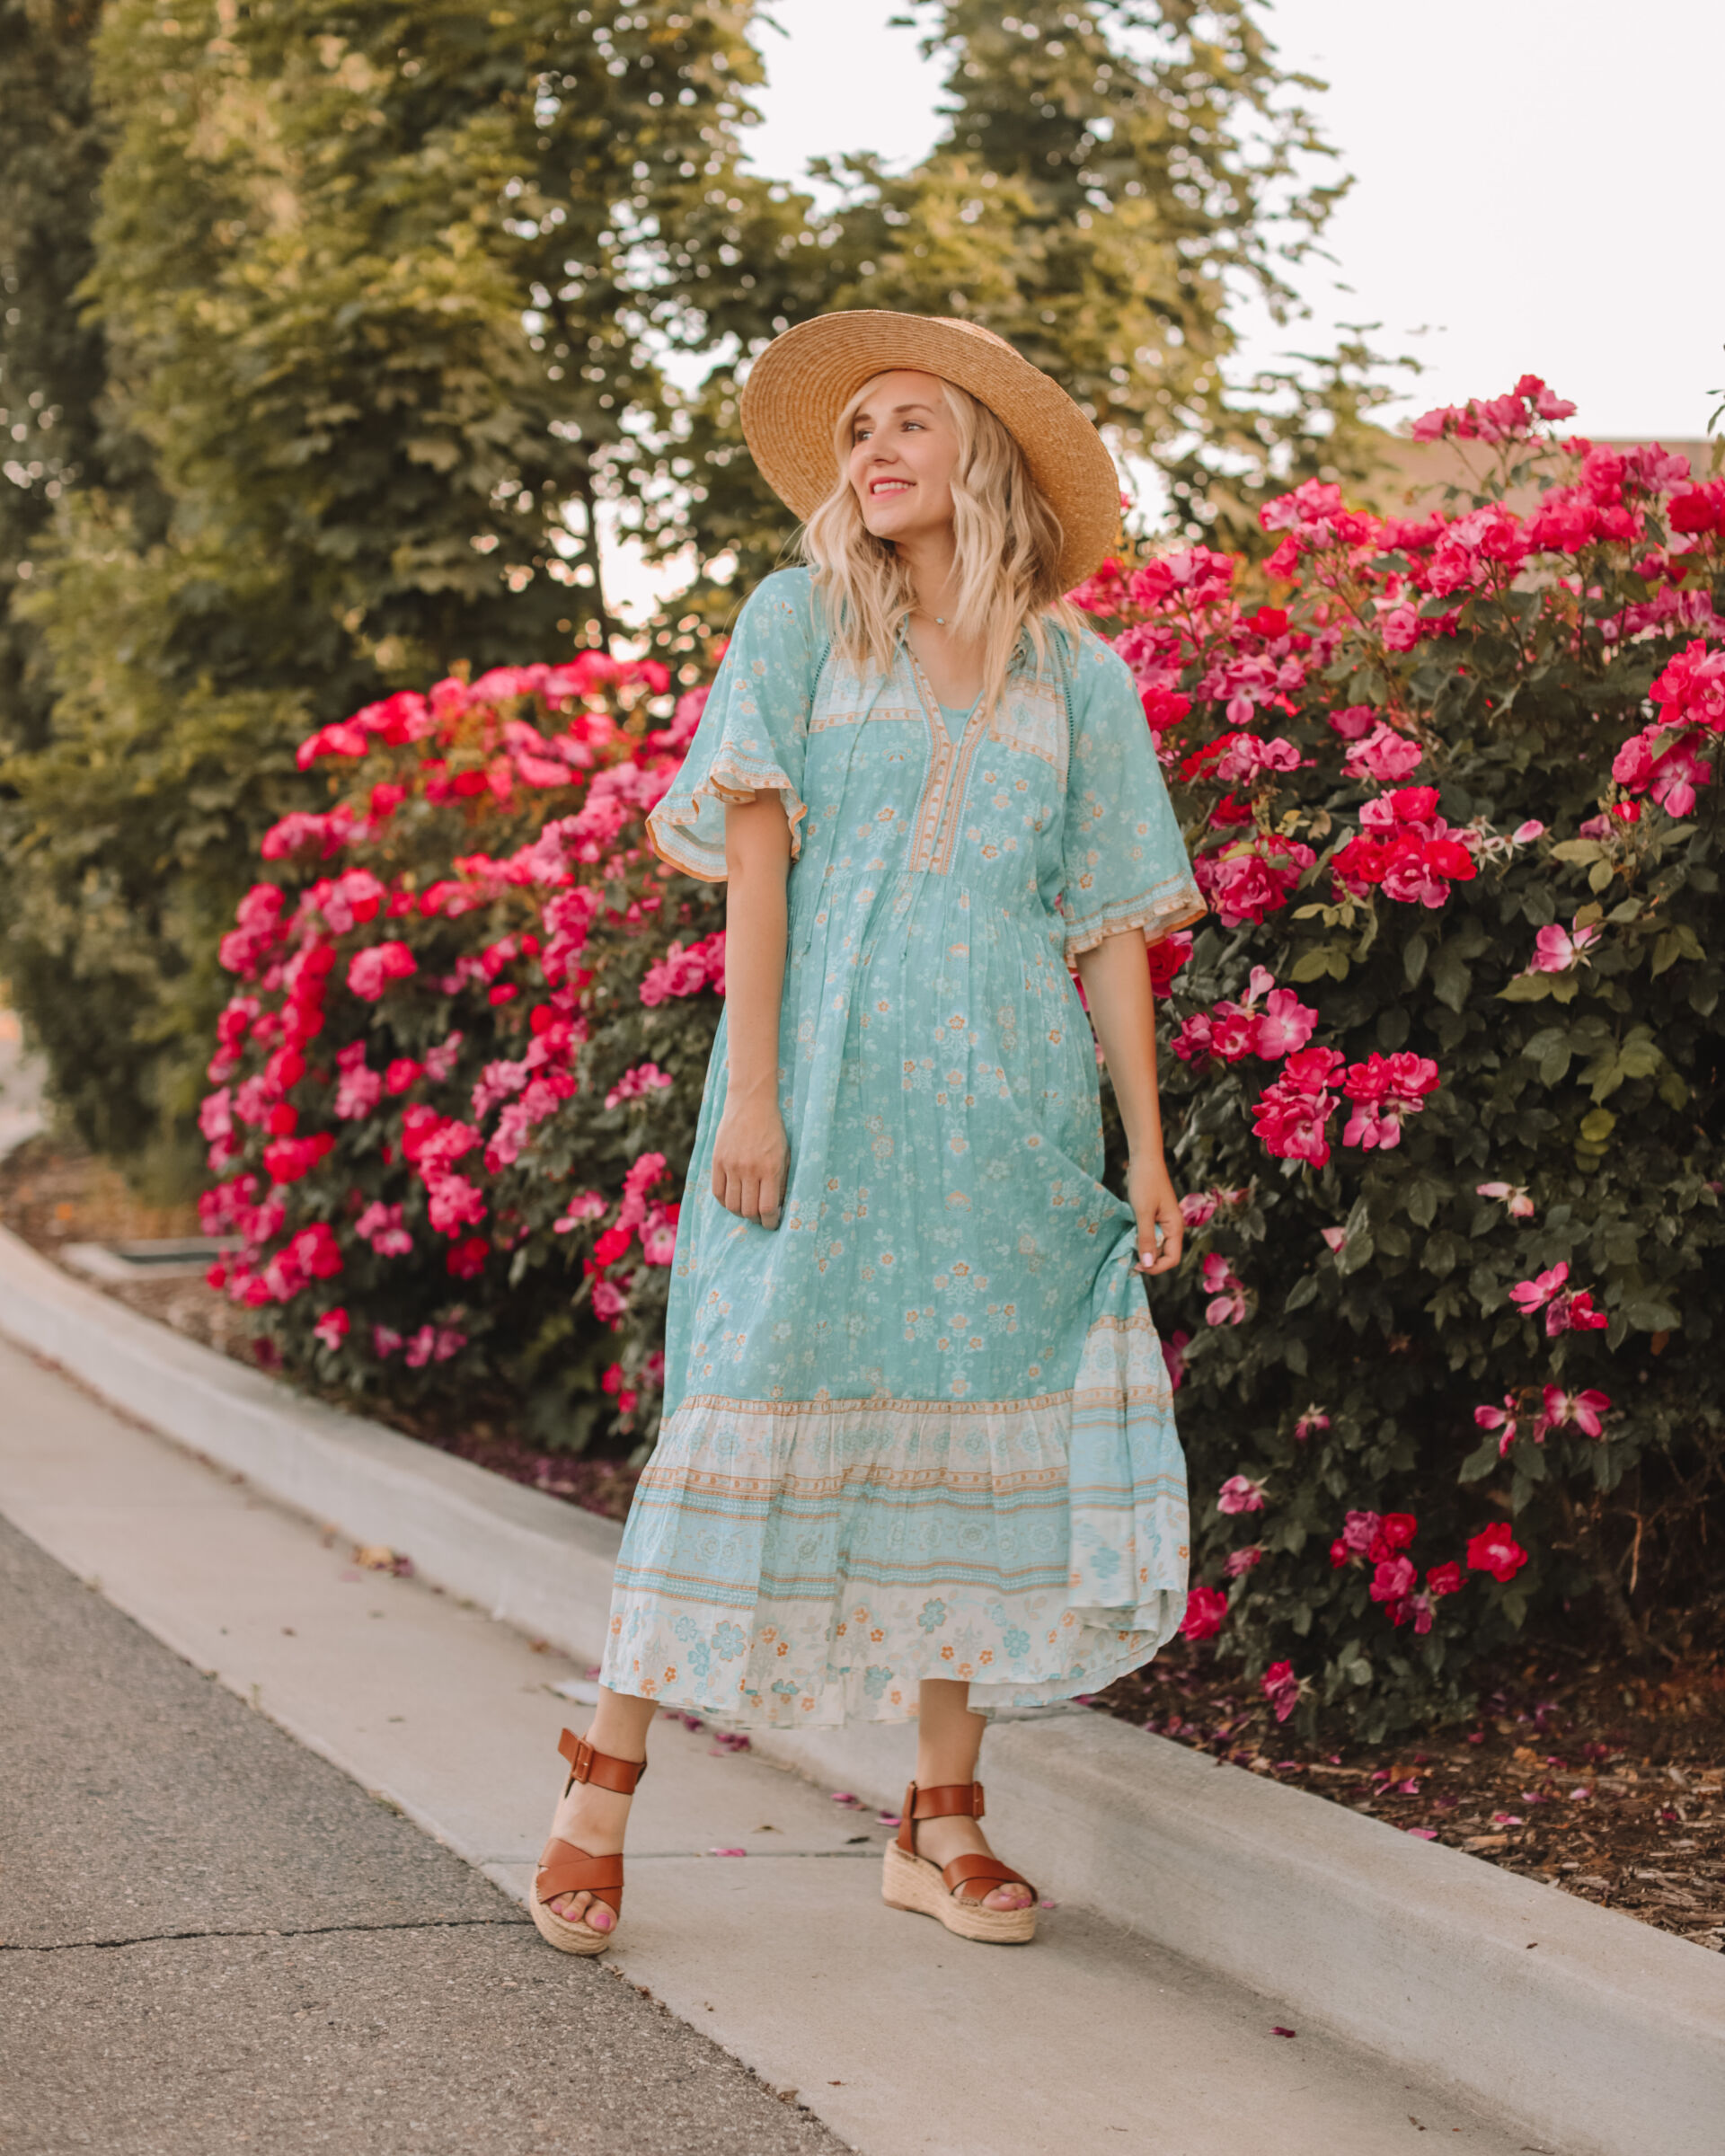 STRAW HATS + AFFORDABLE SUMMER STYLE FINDS